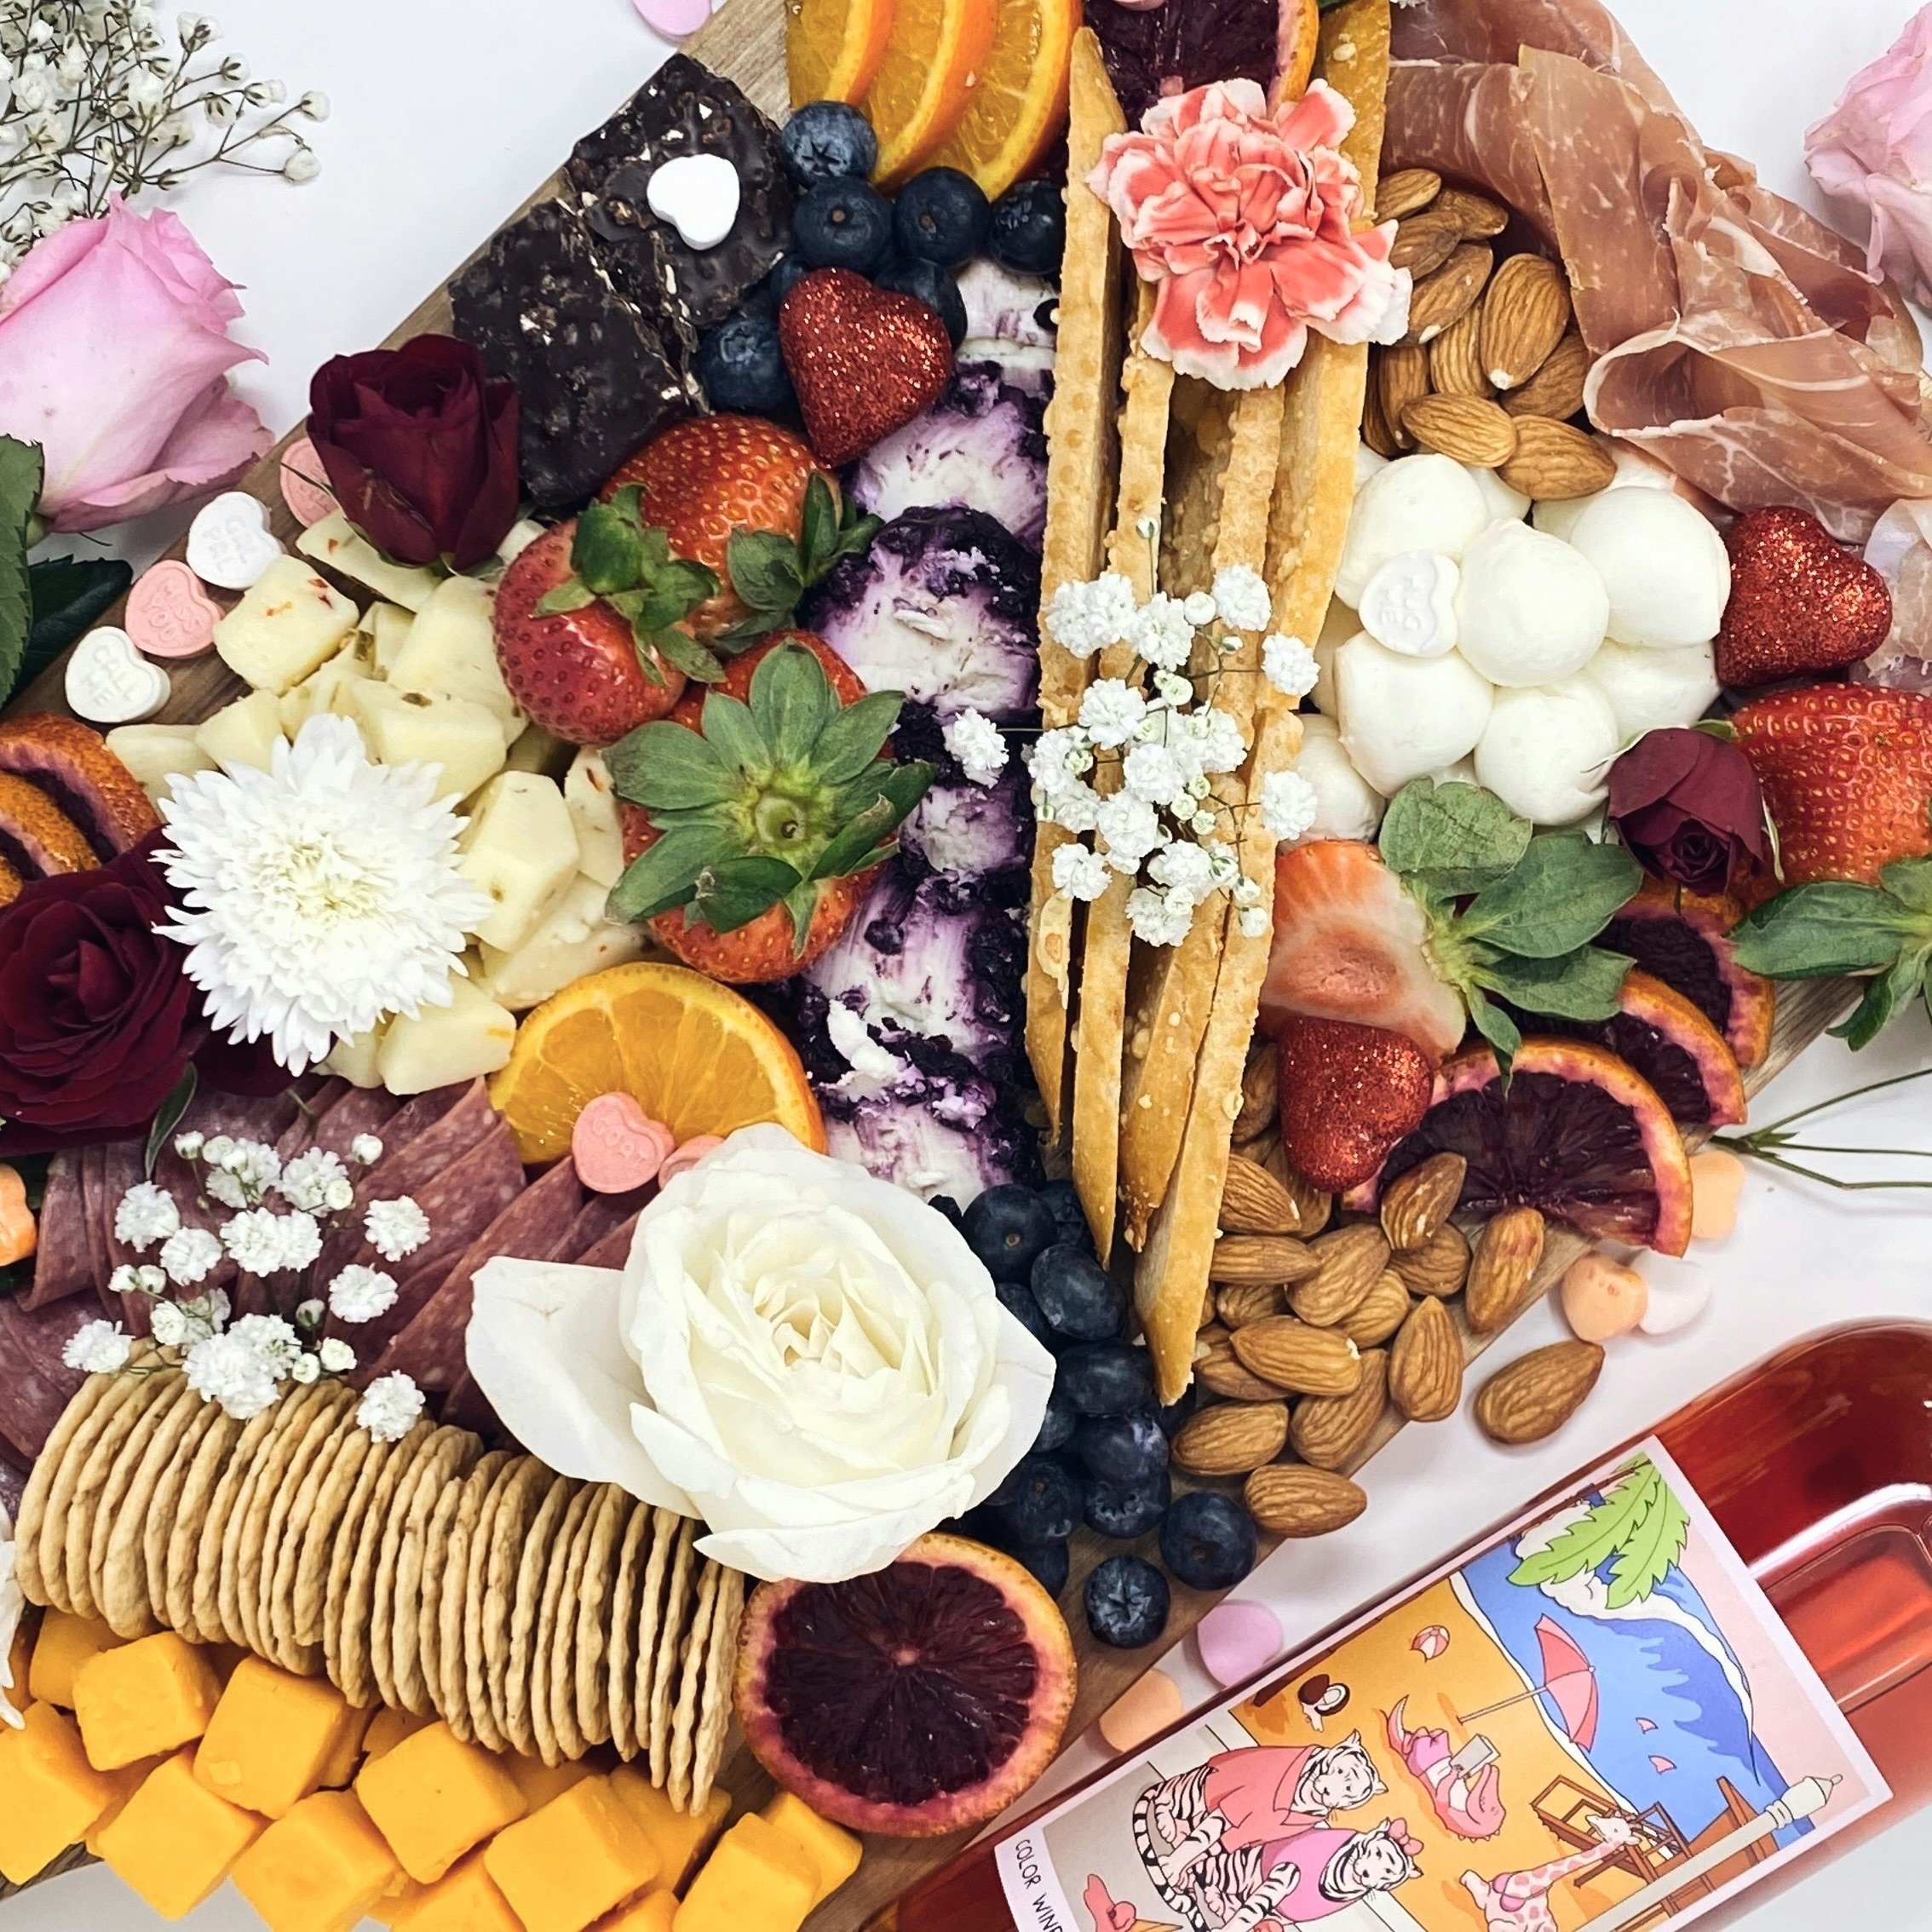 Ummmm who&rsquo;s in??? We&rsquo;re hosting a charcuterie workshop at the studio on May 23rd from 7:30-9PM and you&rsquo;ll leave with your own custom created box with 6 gourmet cheeses, meats, crackers, jams, pickles, olives, chocolate, fruit&hellip